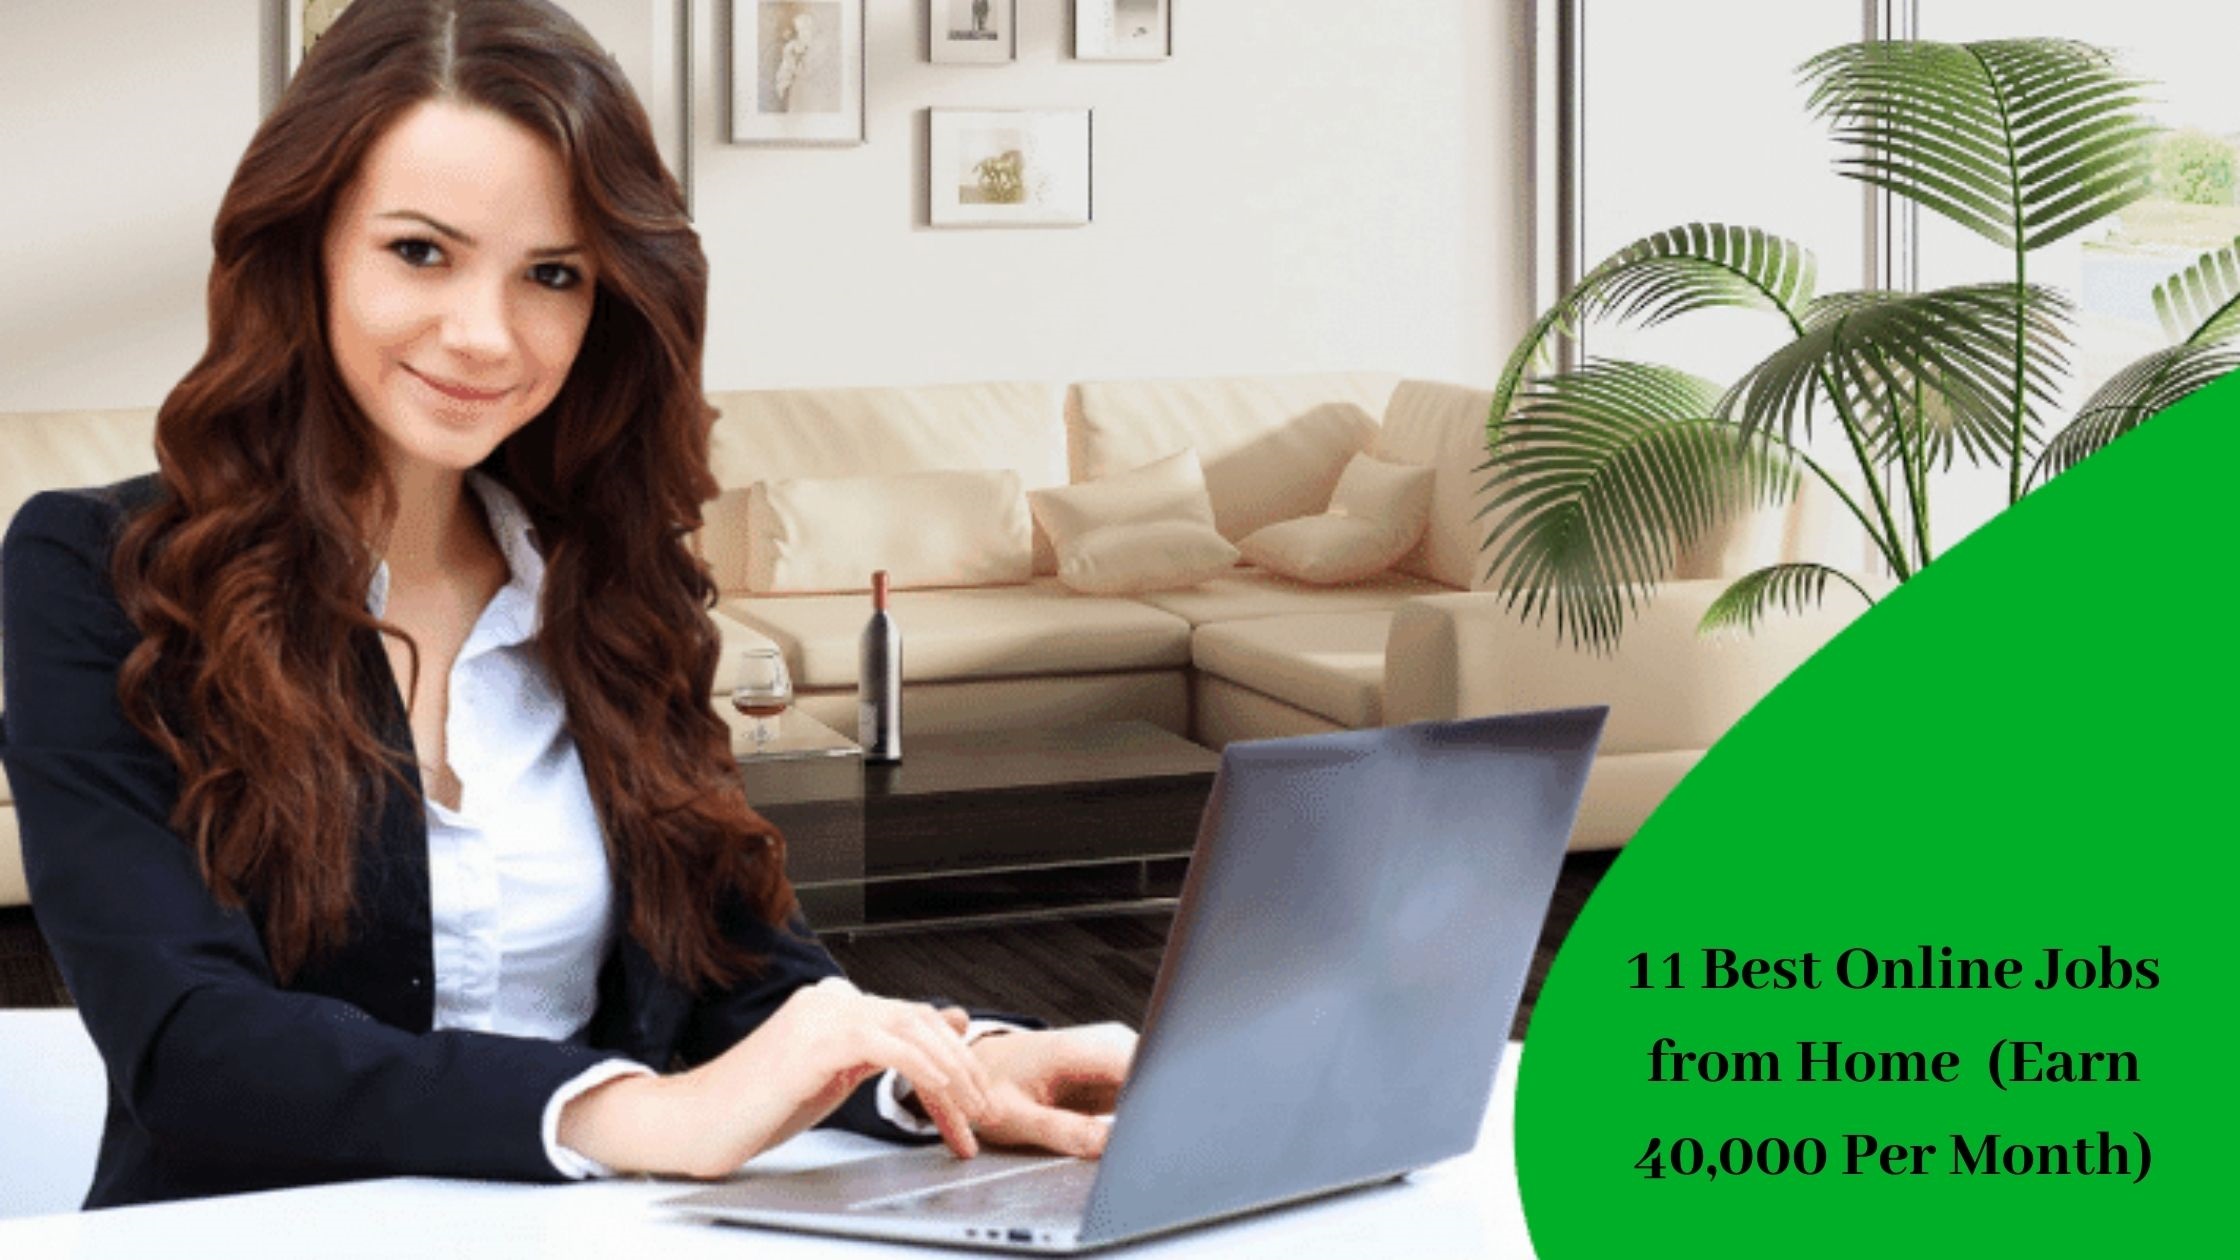 11 Best Online Jobs from Home – No investment (Earn 40,000 Per Month)